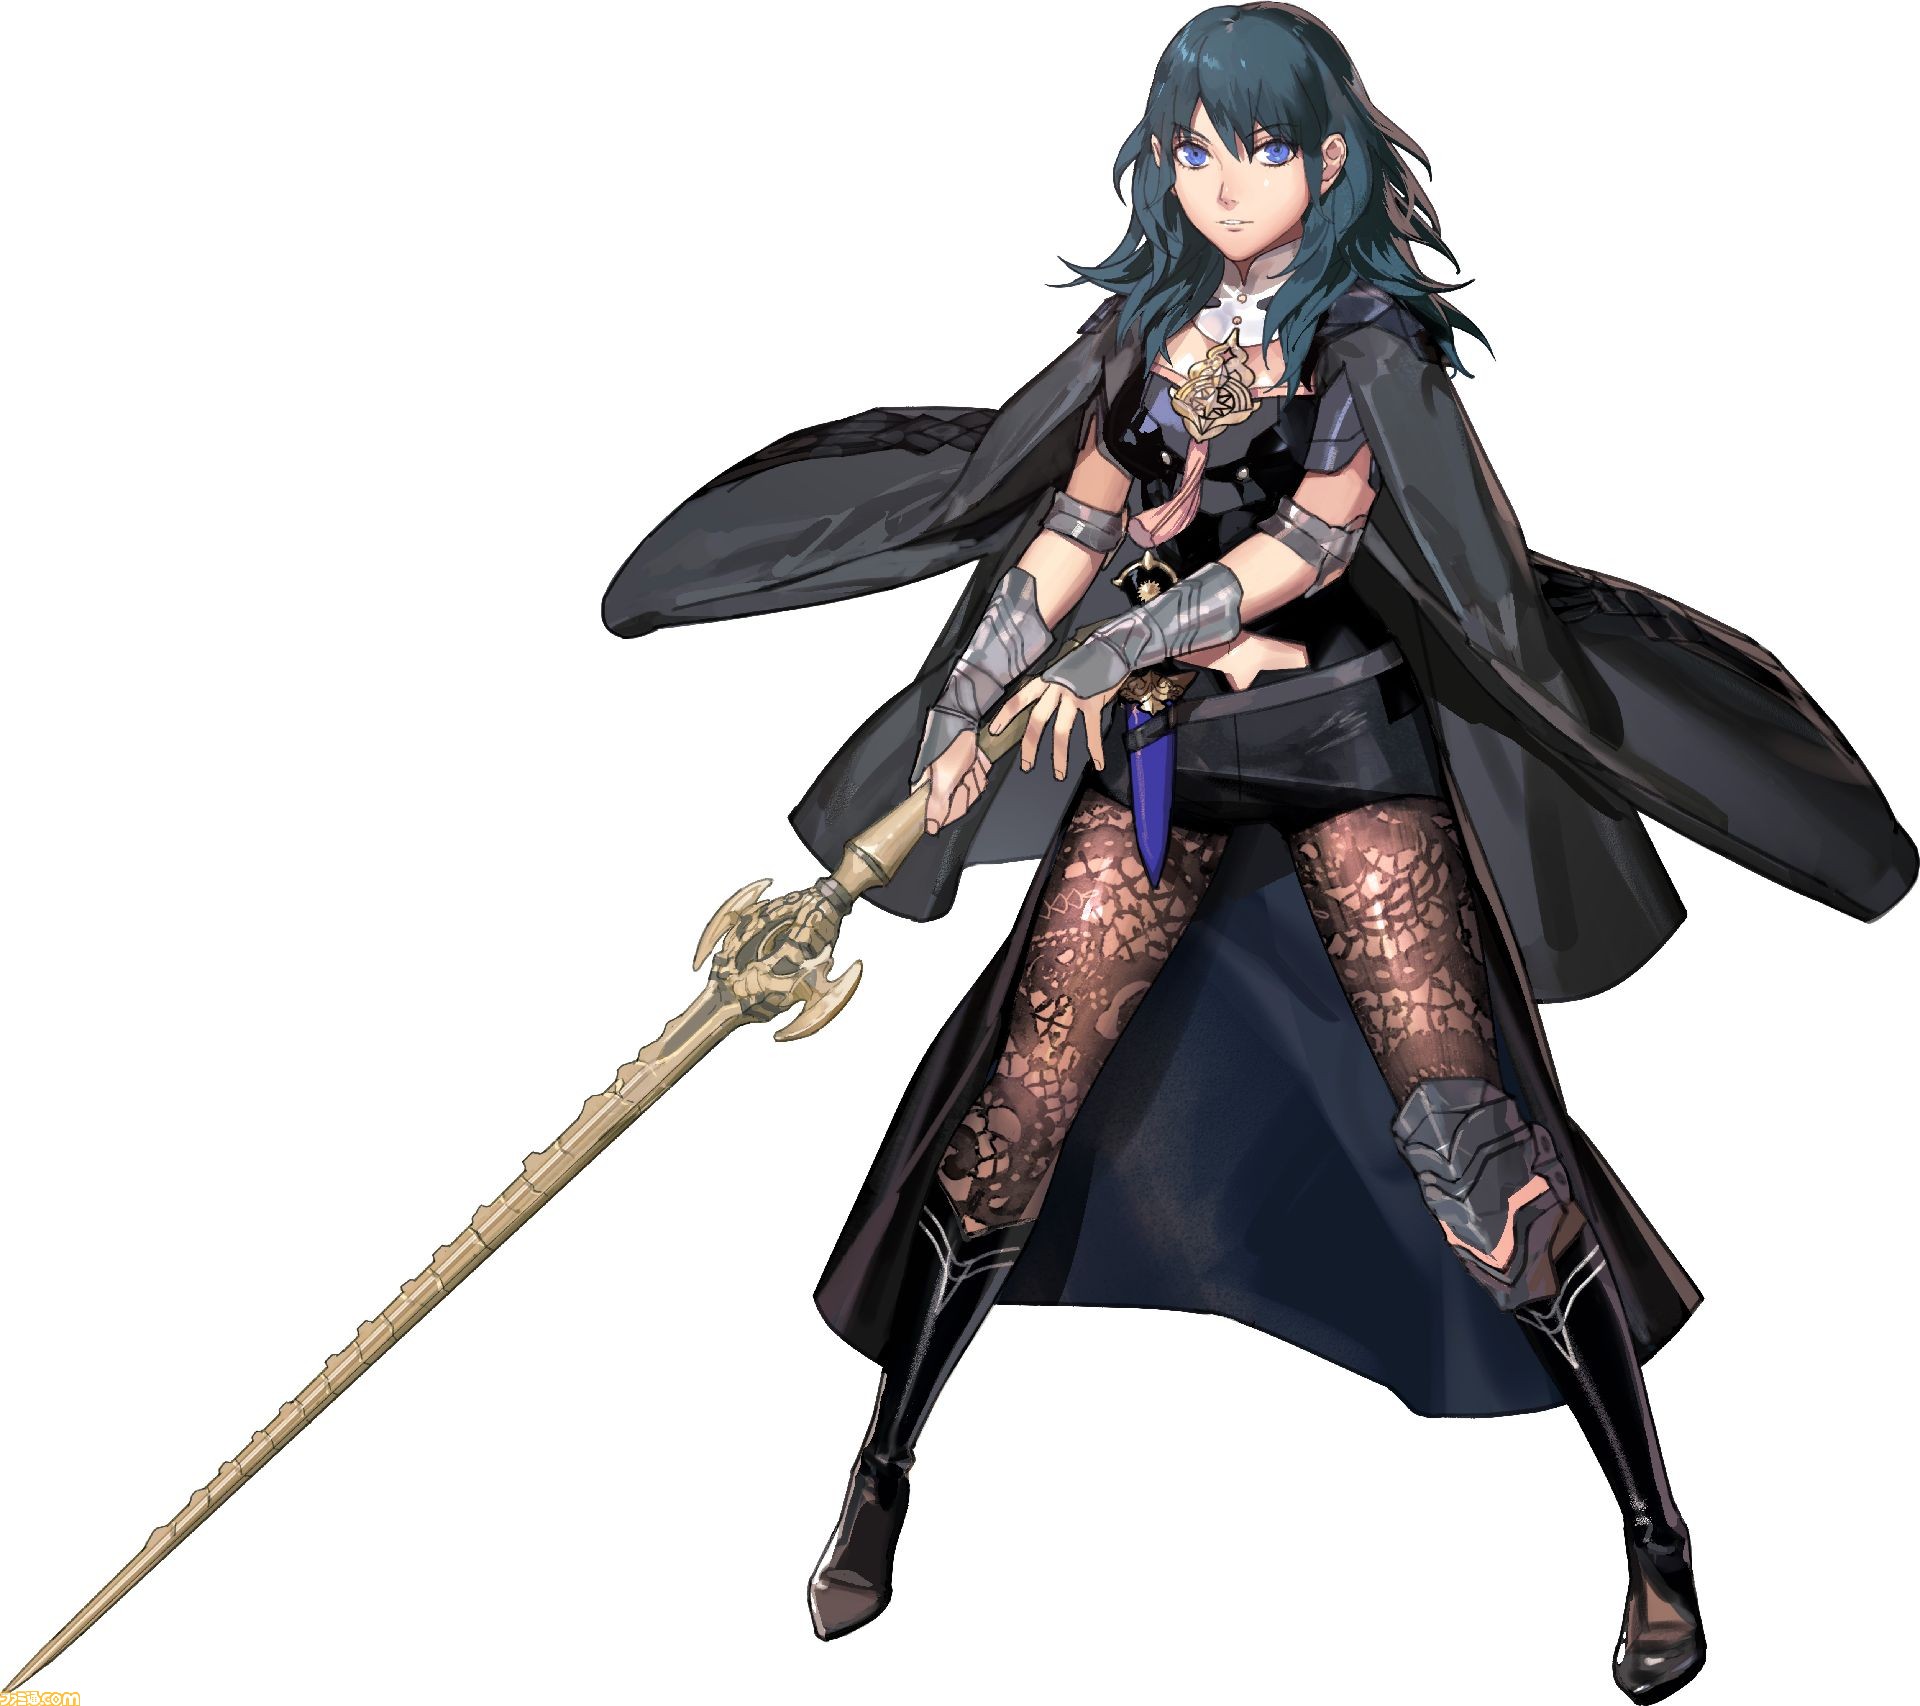 https://www.perfectly-nintendo.com/wp-content/uploads/sites/1/nggallery/fire-emblem-three-houses-25-04-2019-1/5.jpg